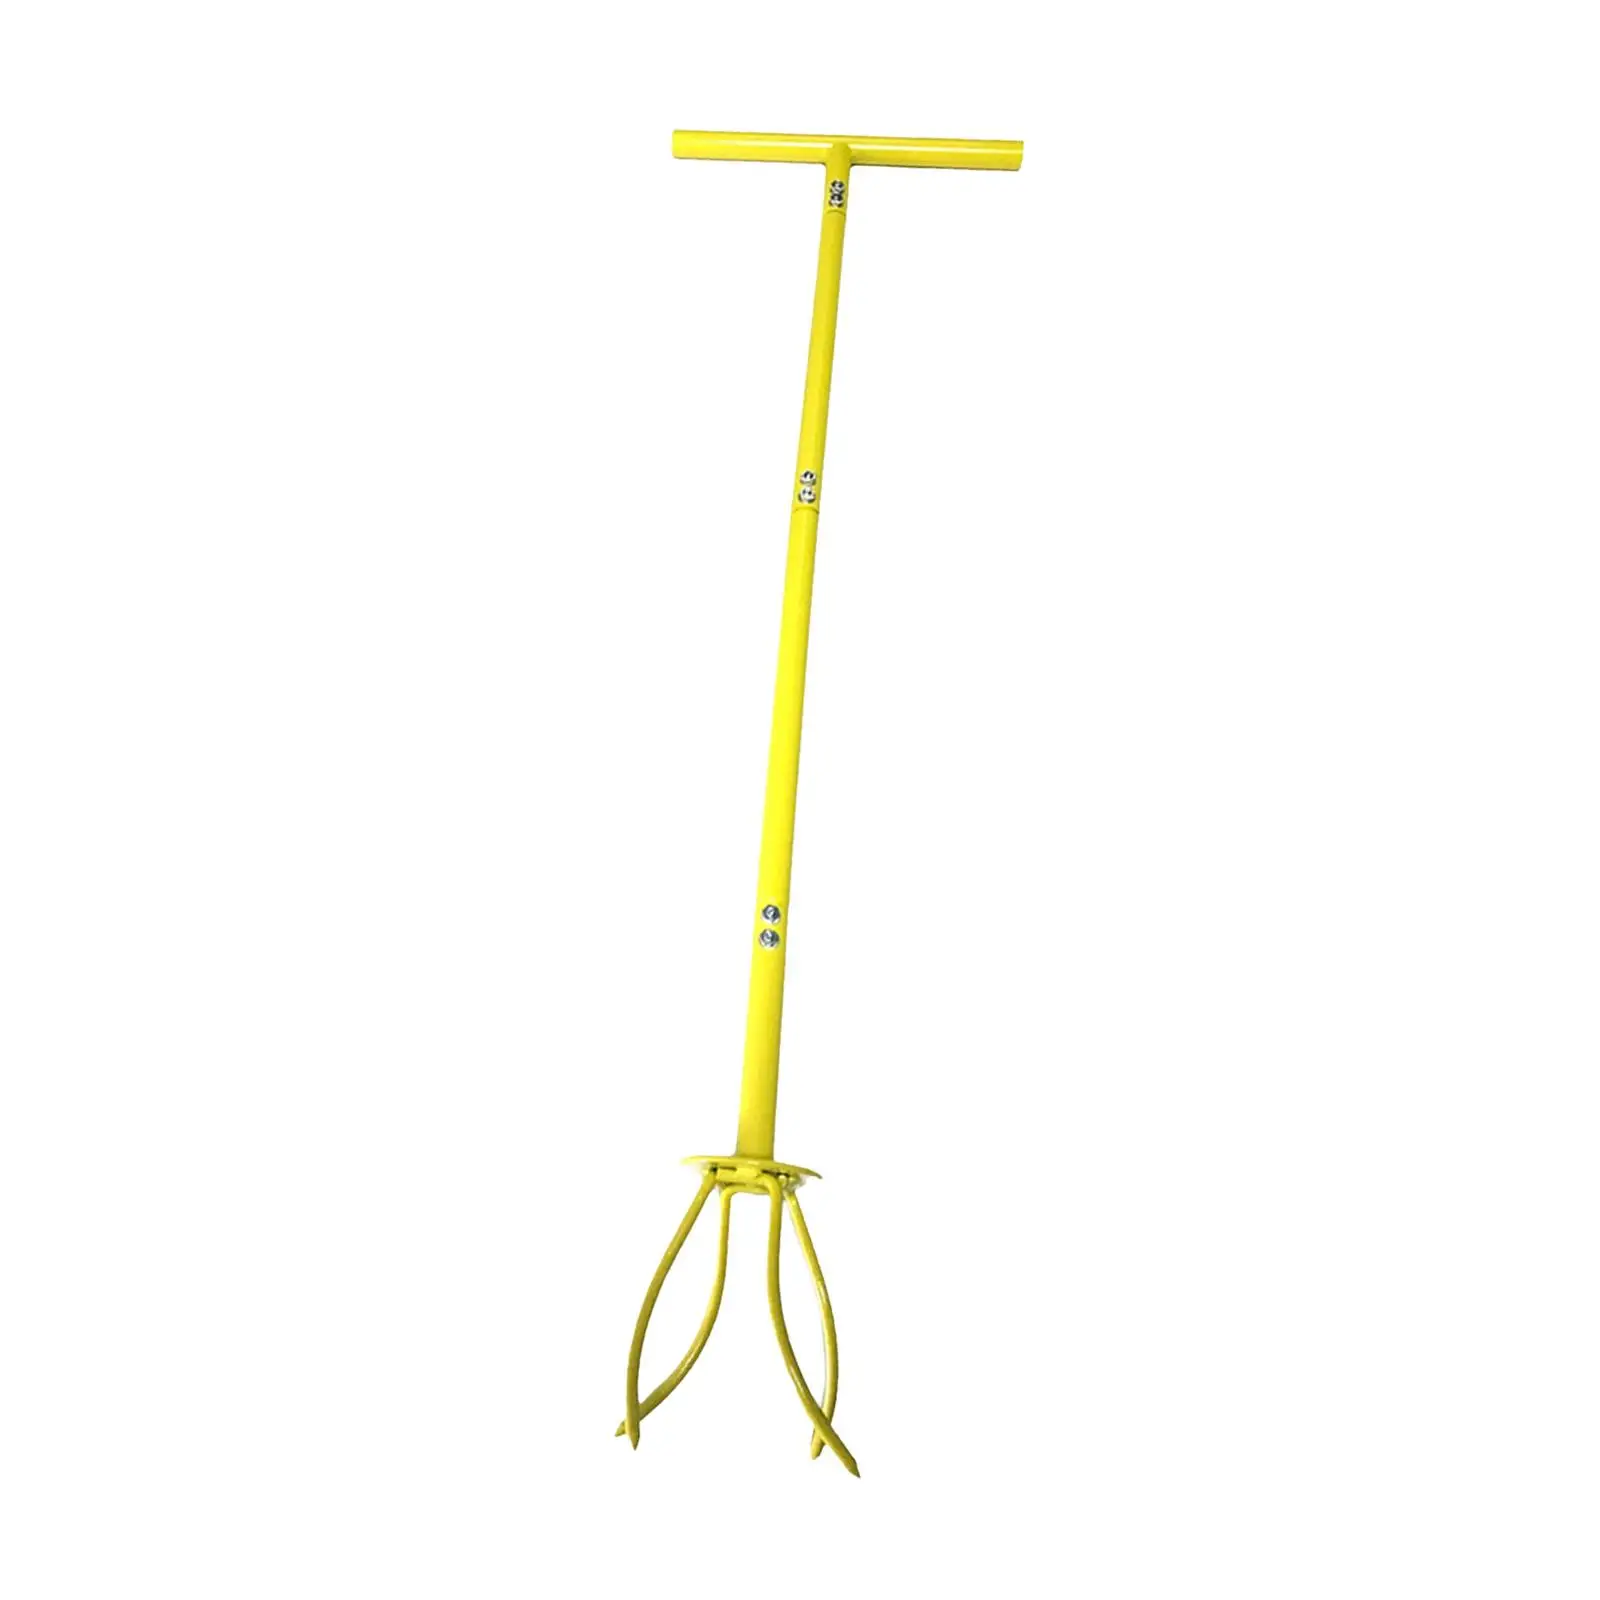 Manual Hand Tiller Rust Resistant Heavy Duty for Cultivate, Loosen, Aerate with Adjustable Shaft with A Removable Big Claw